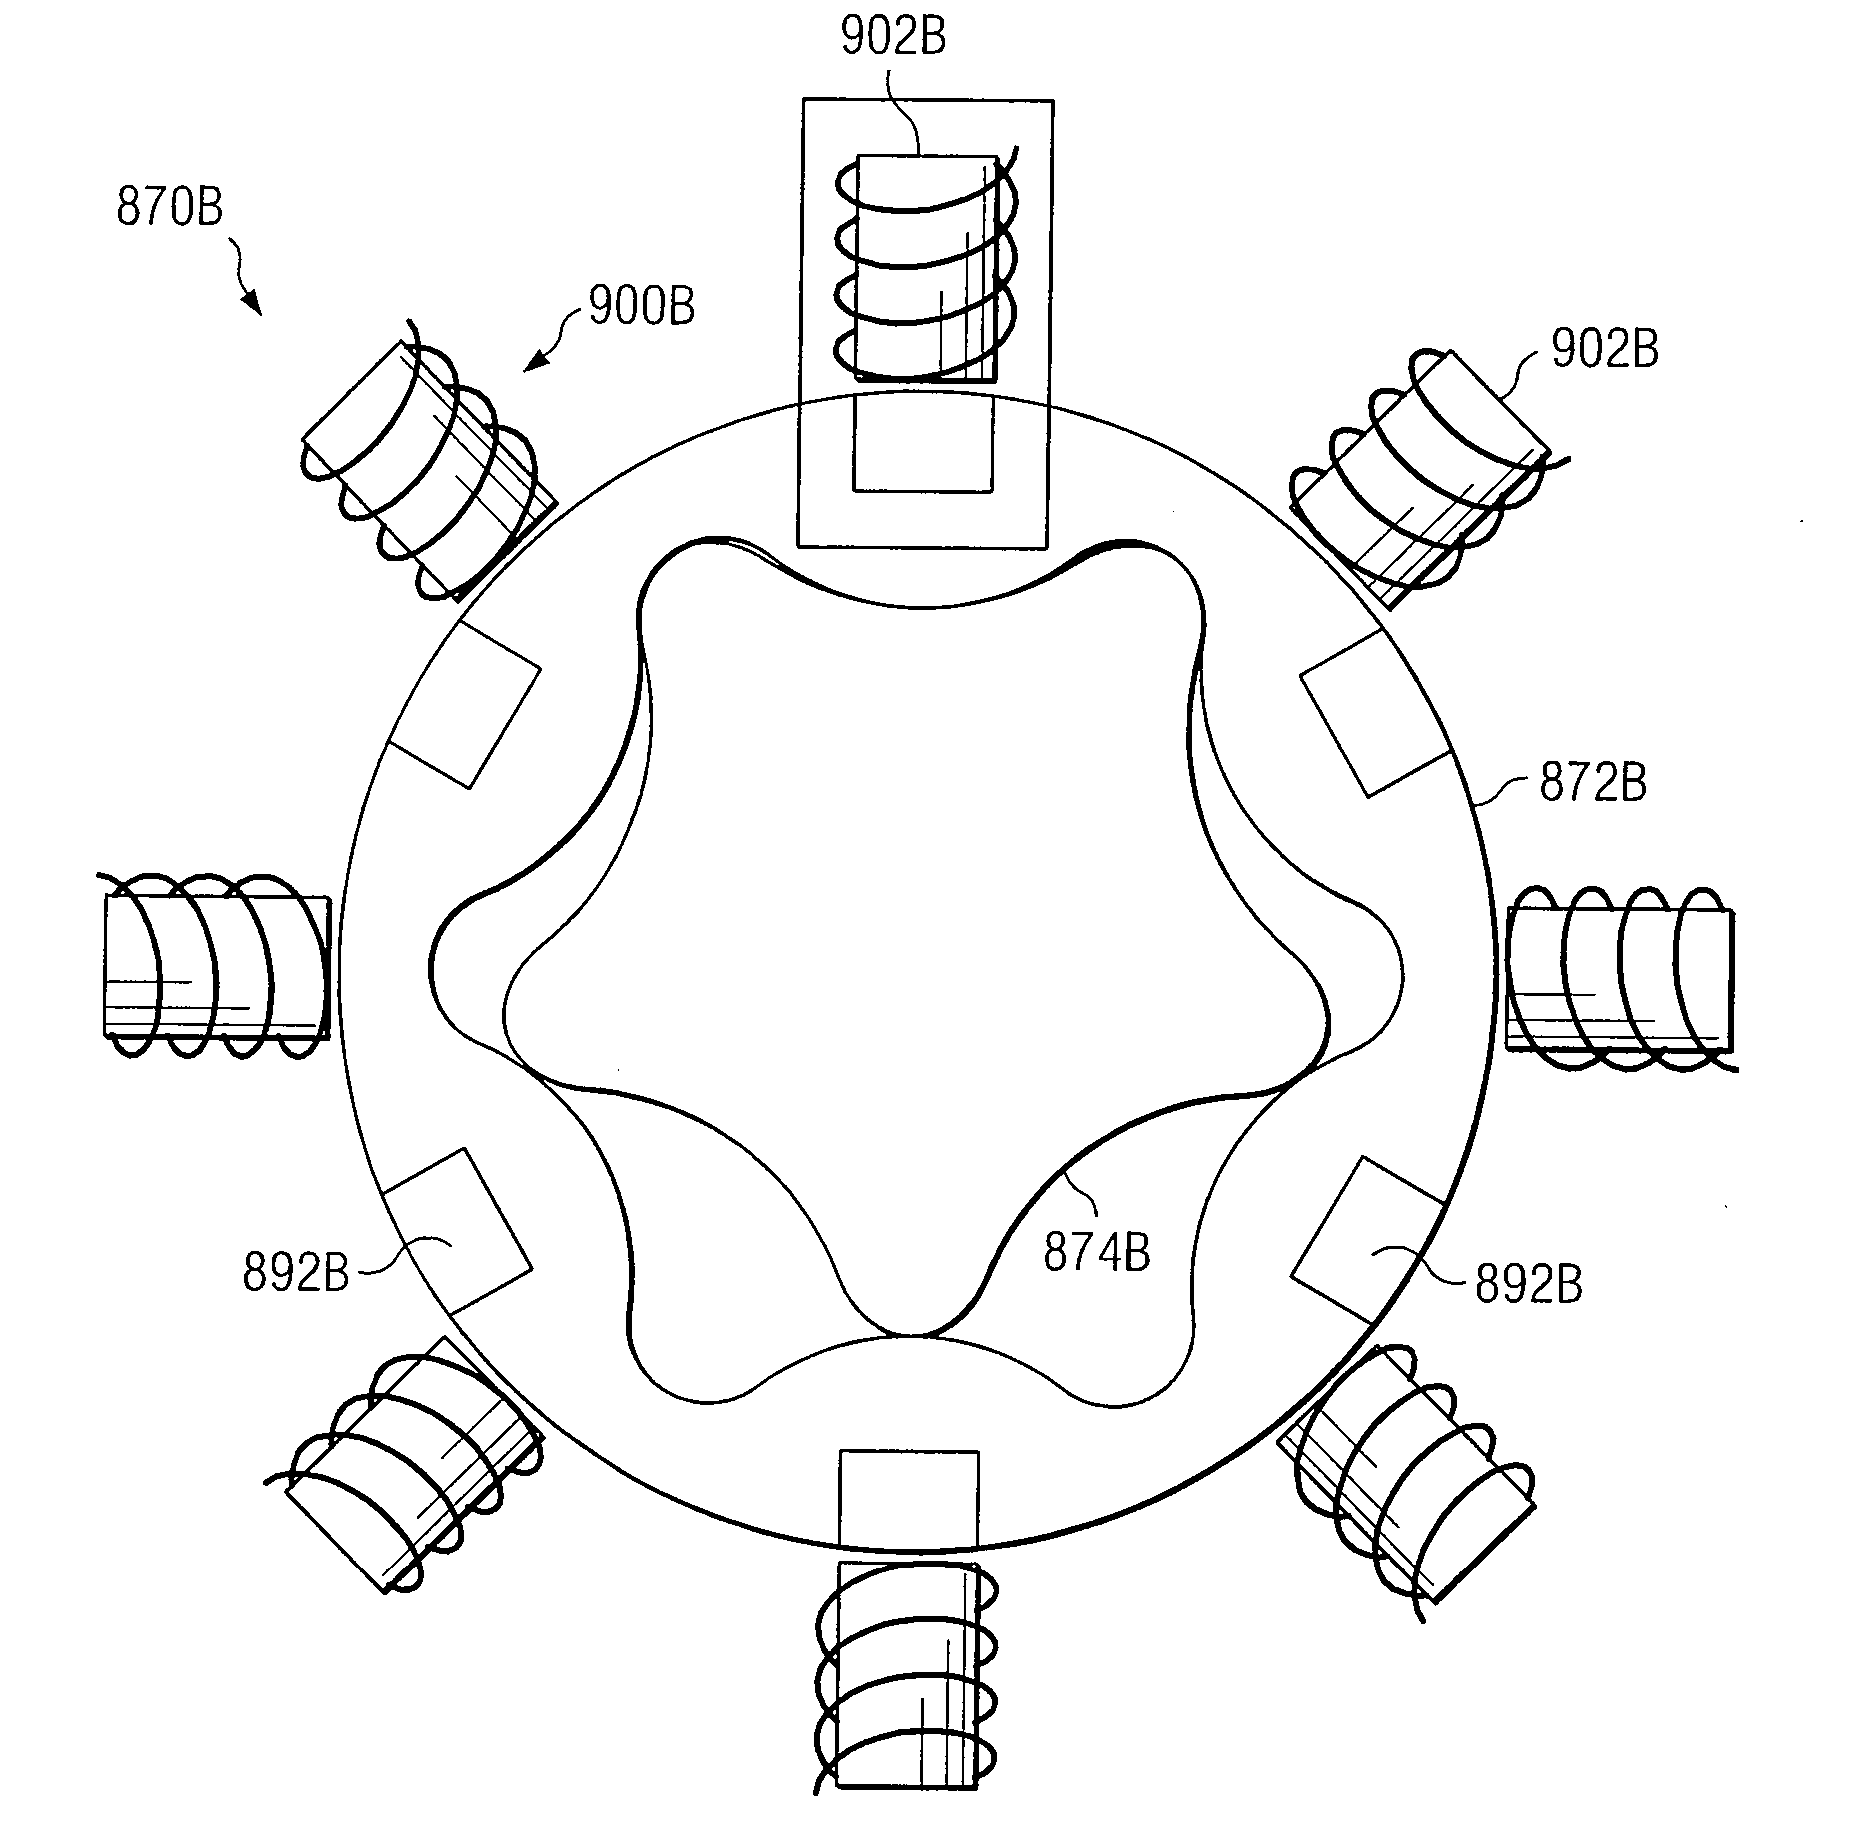 Gerotor Apparatus for a Quasi-Isothermal Brayton Cycle Engine